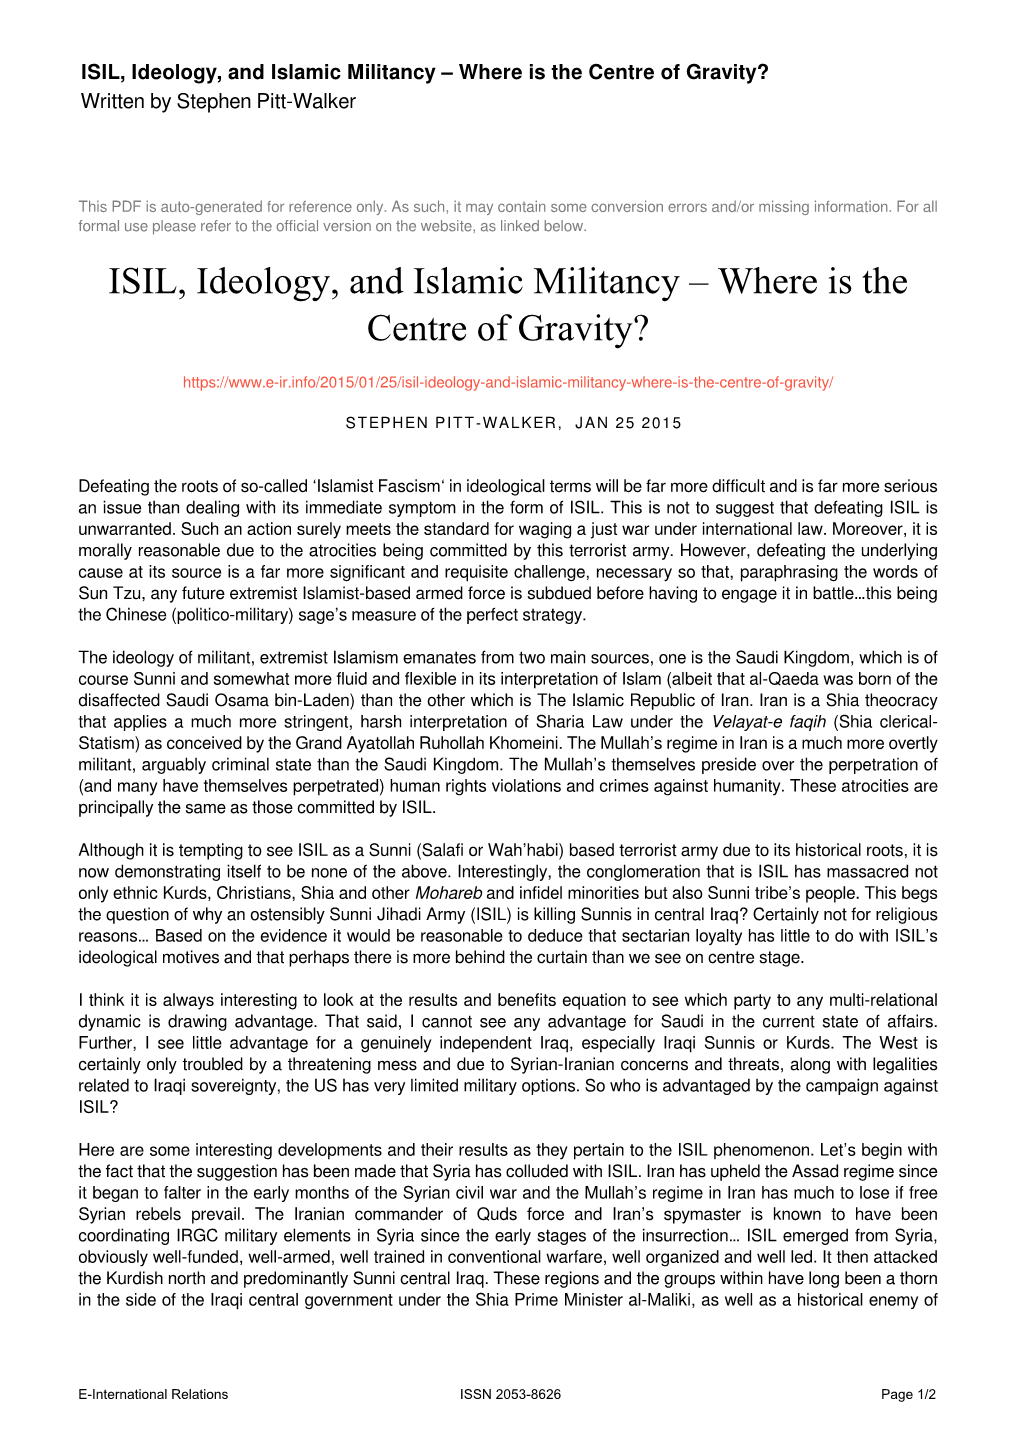 ISIL, Ideology, and Islamic Militancy – Where Is the Centre of Gravity? Written by Stephen Pitt-Walker